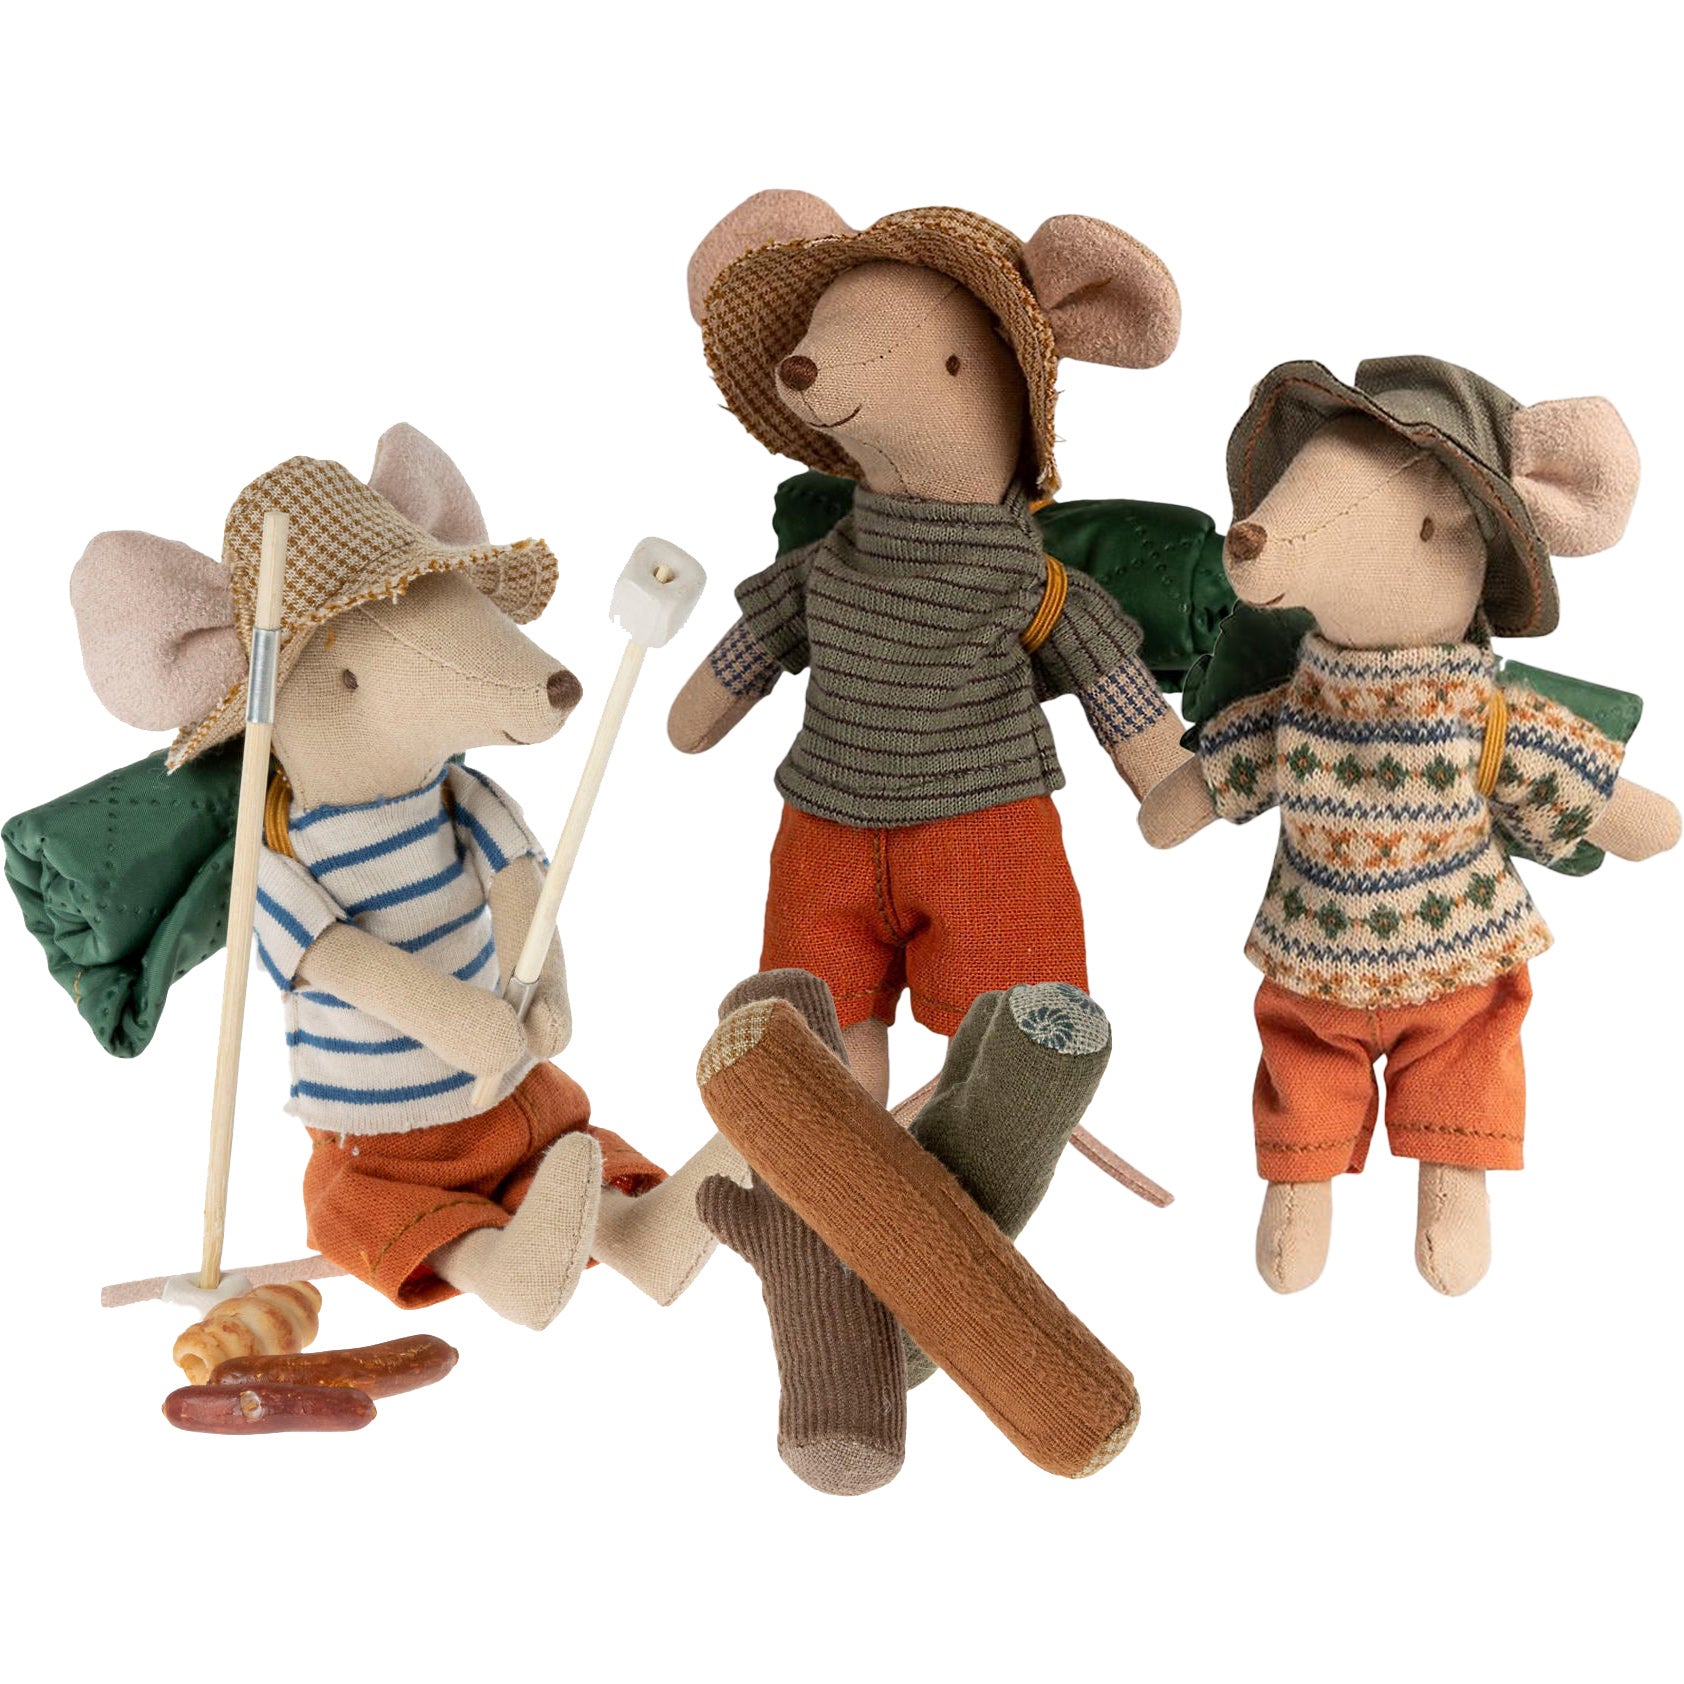 maileg fabric camping bonfire set with 3 big brother mice soft toys toasting marshmallows